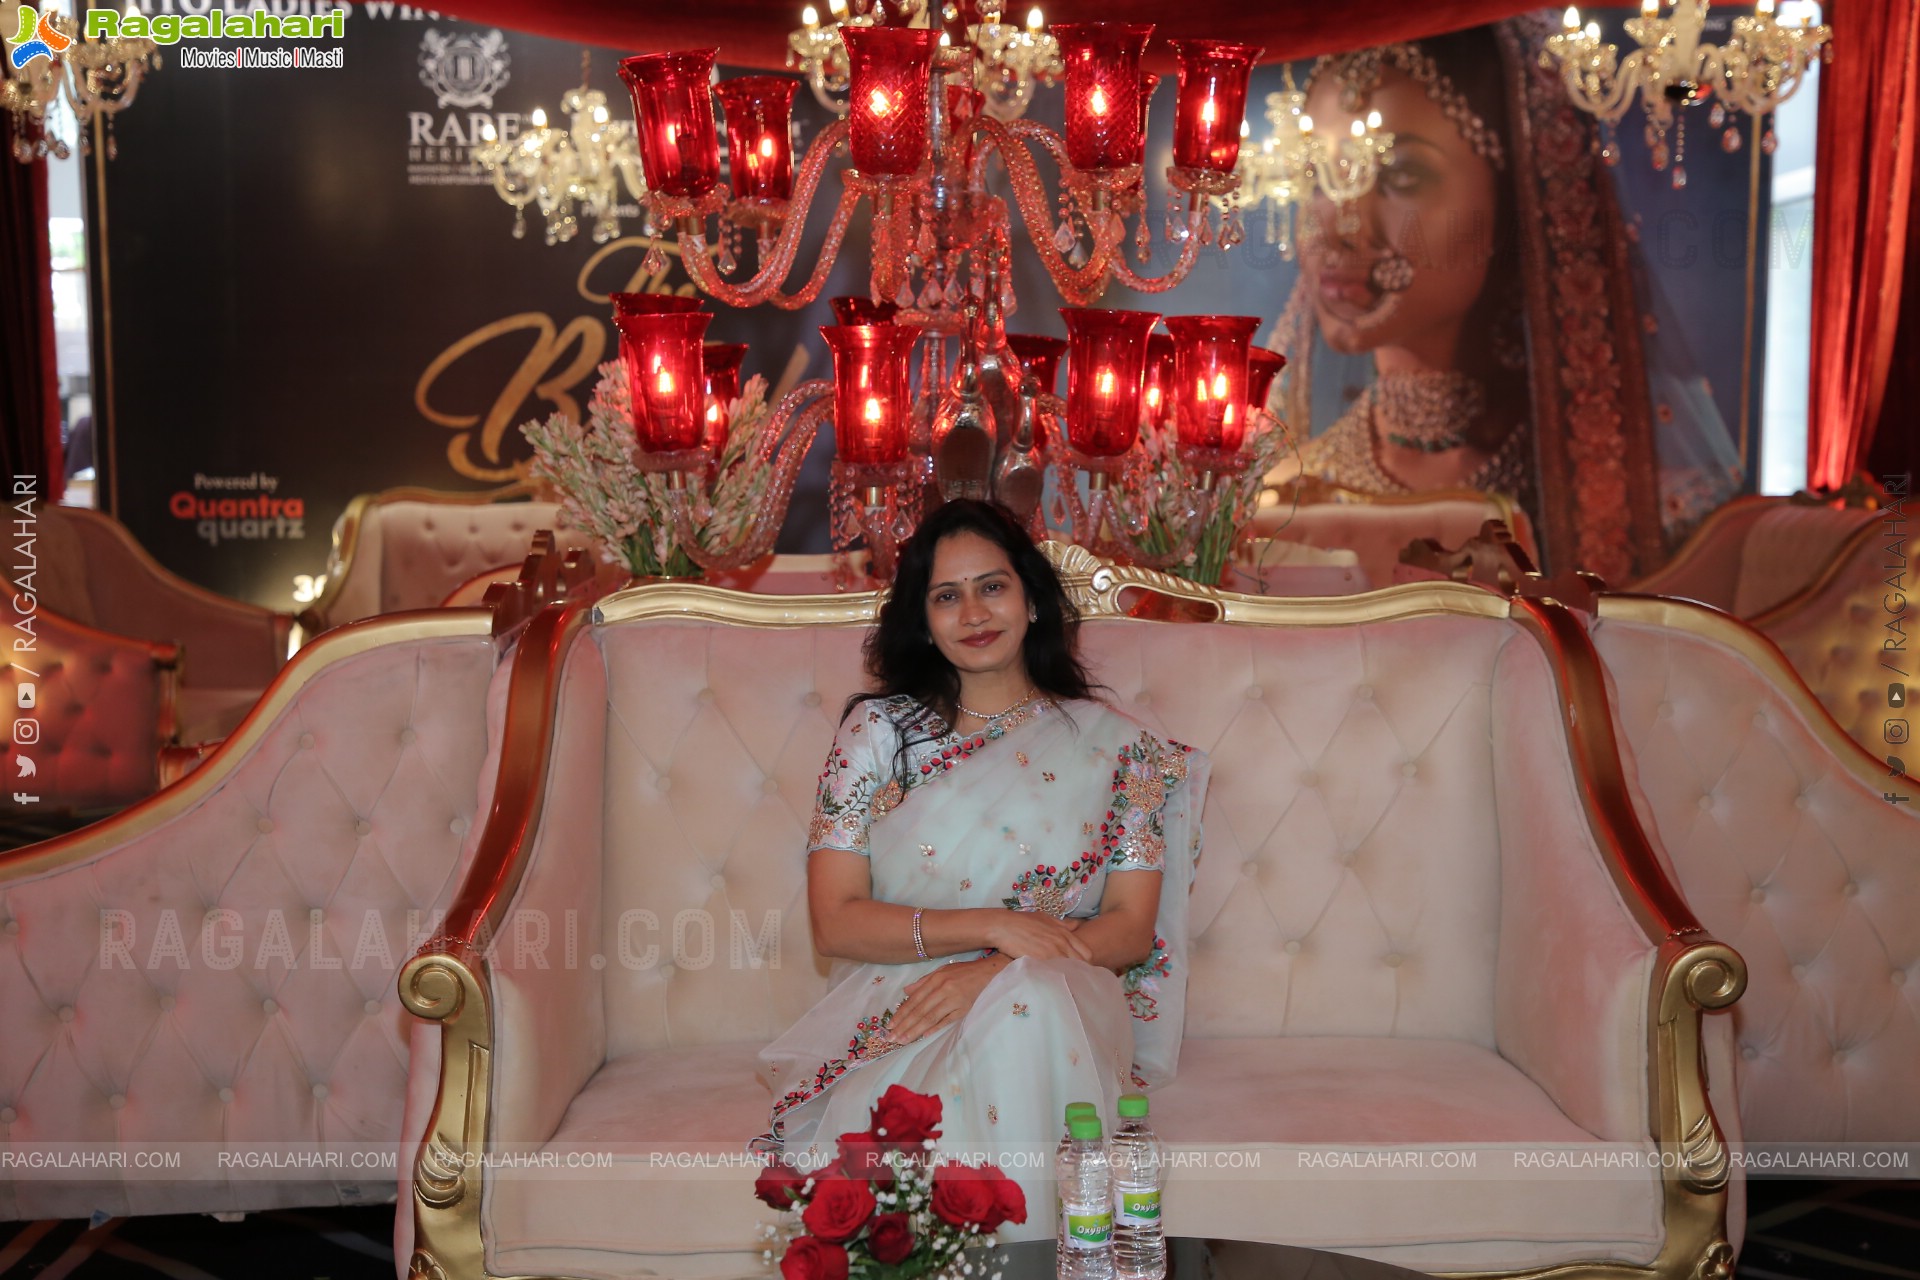 The Bridal Story Exhibition Begins at HICC Novotel, Hyderabad